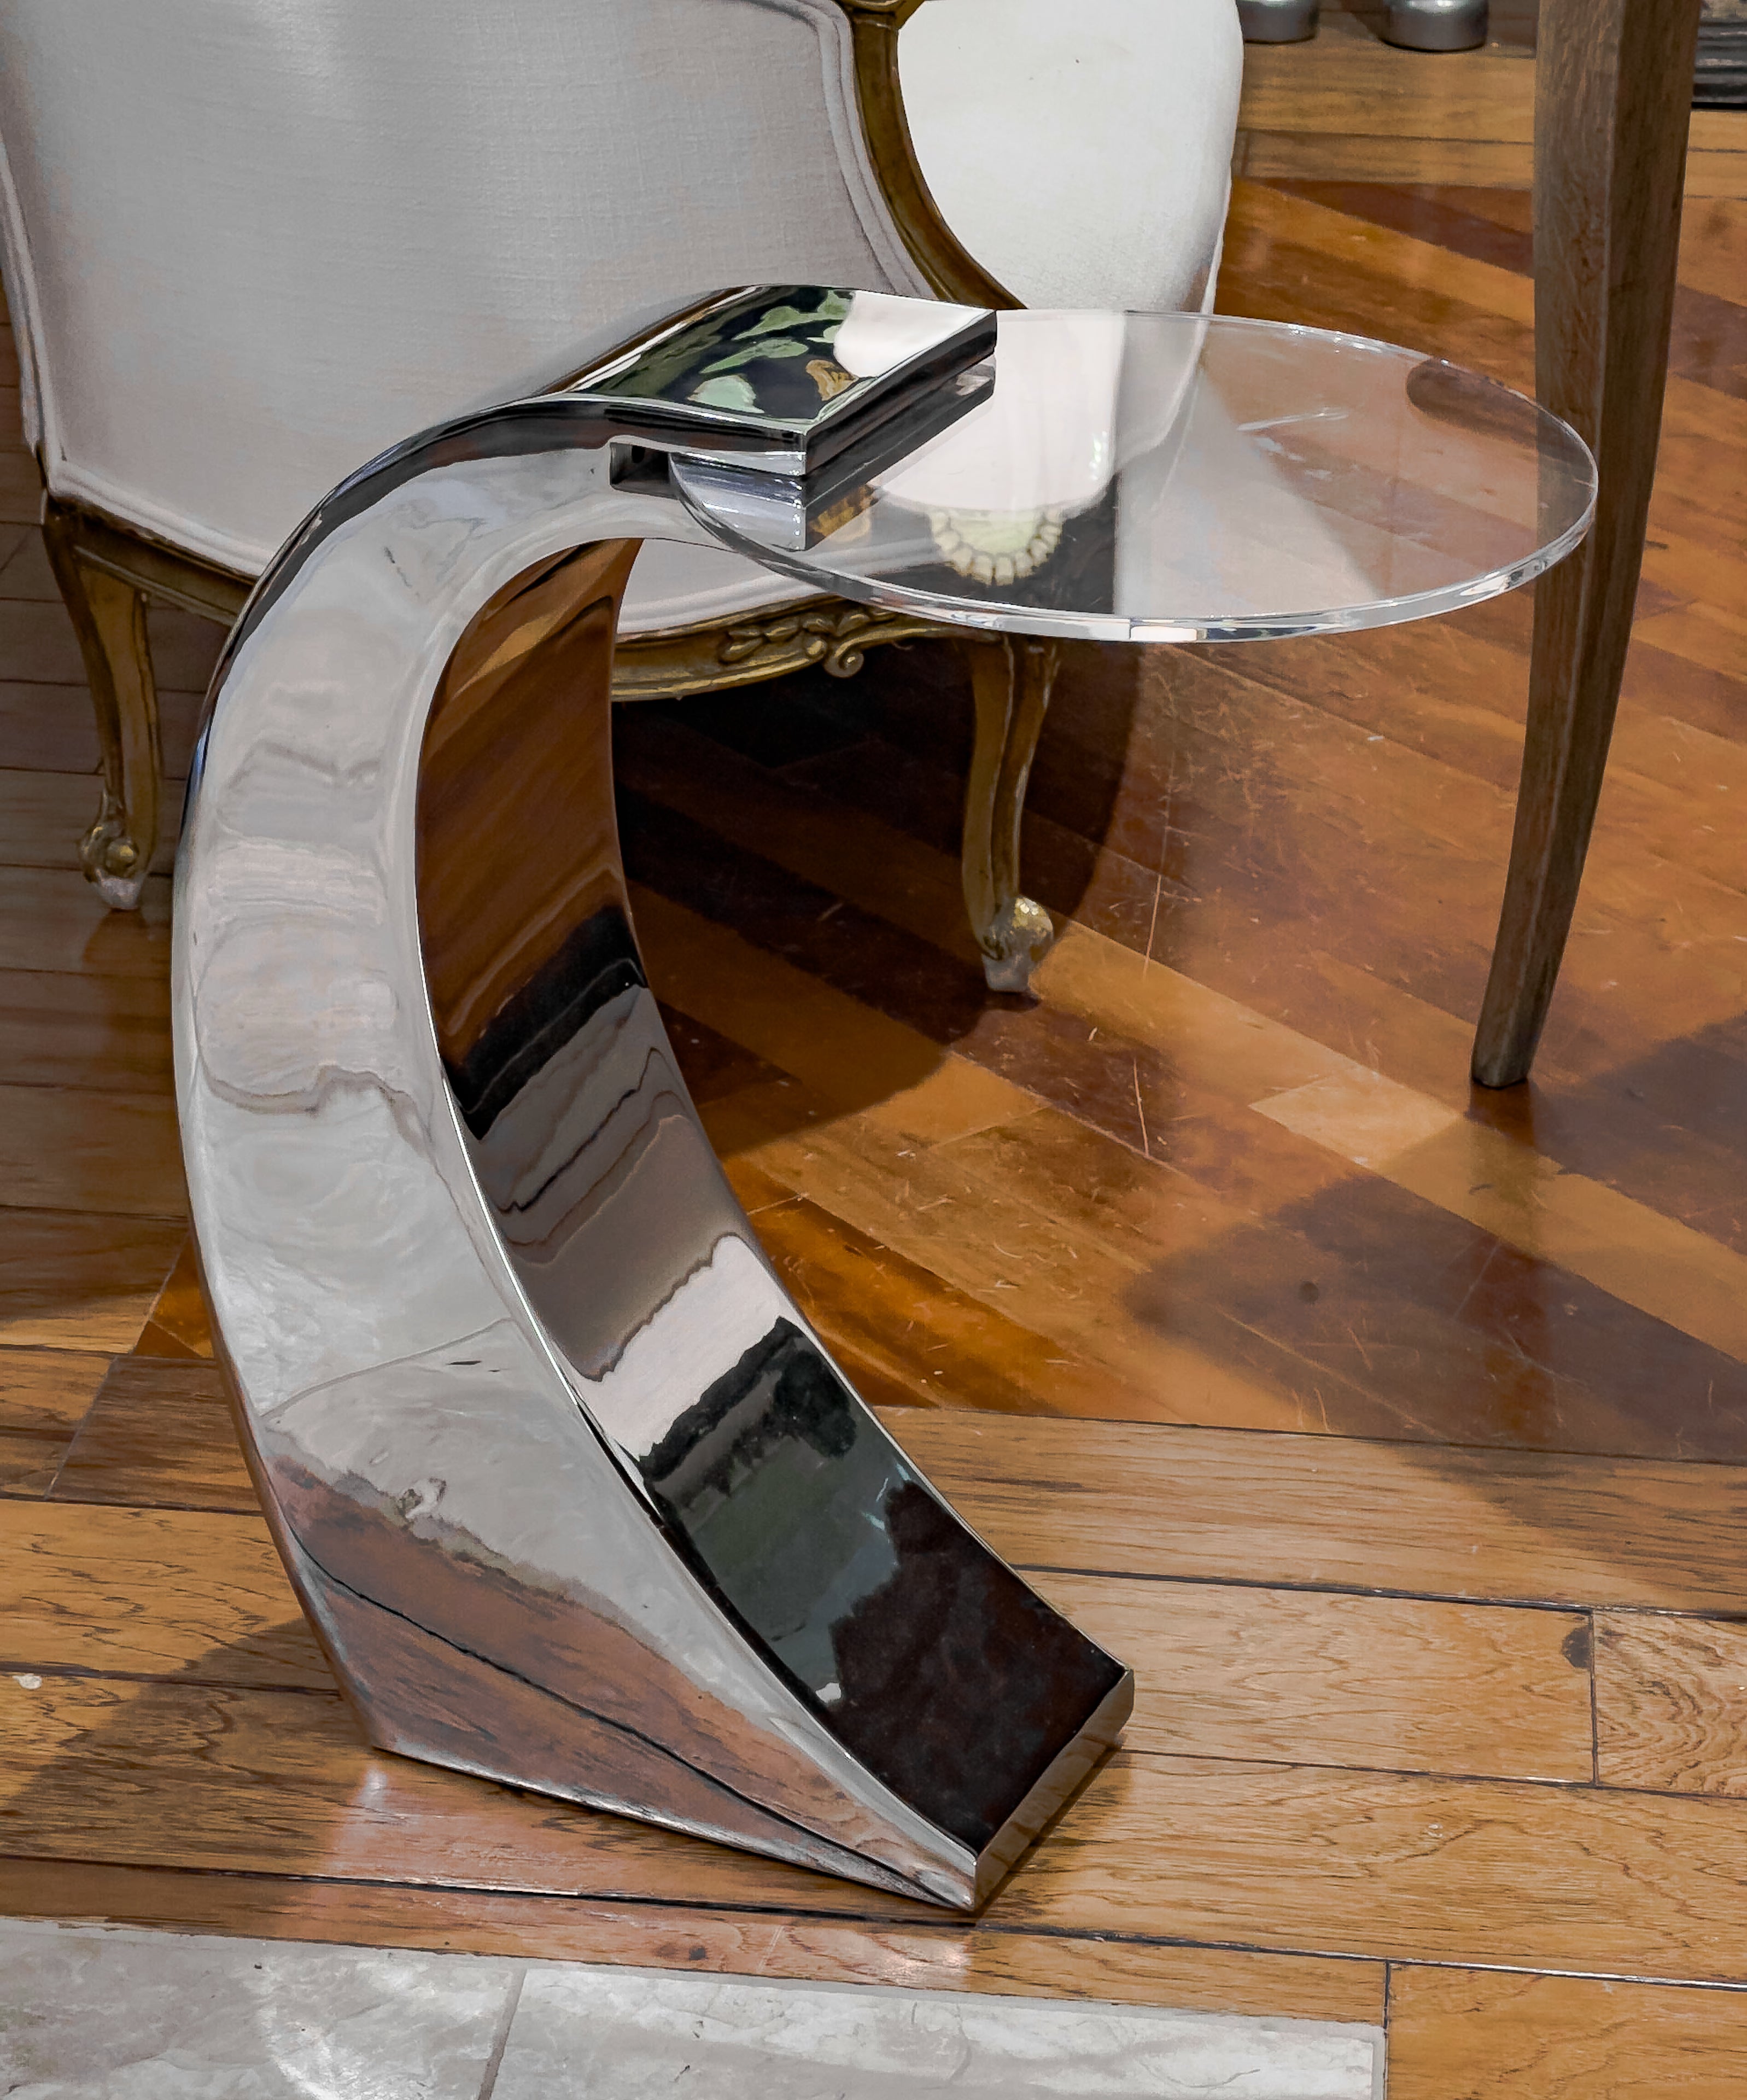 Mid-Century Modern from around the 1960's. Timeless and graceful contemporary design in chrome & acrylic sure to compliment any elegantly furnished home. 

Try adding this great modern side table to add a punch to any decor! The bright chrome base